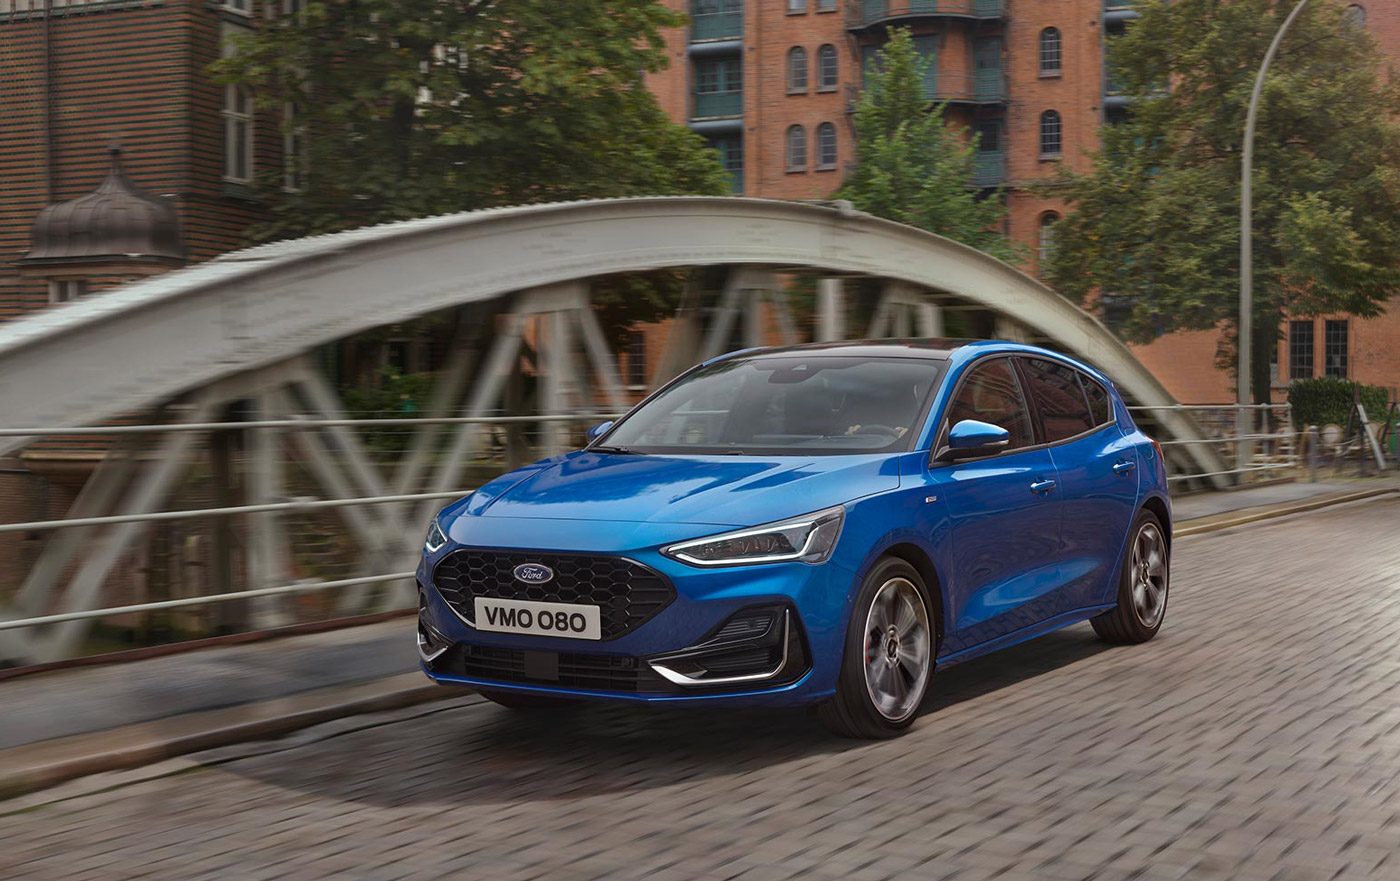 achtergrond Goed Voorbijganger Will the renewed Ford Focus be a sales topper again? - Pledge Times